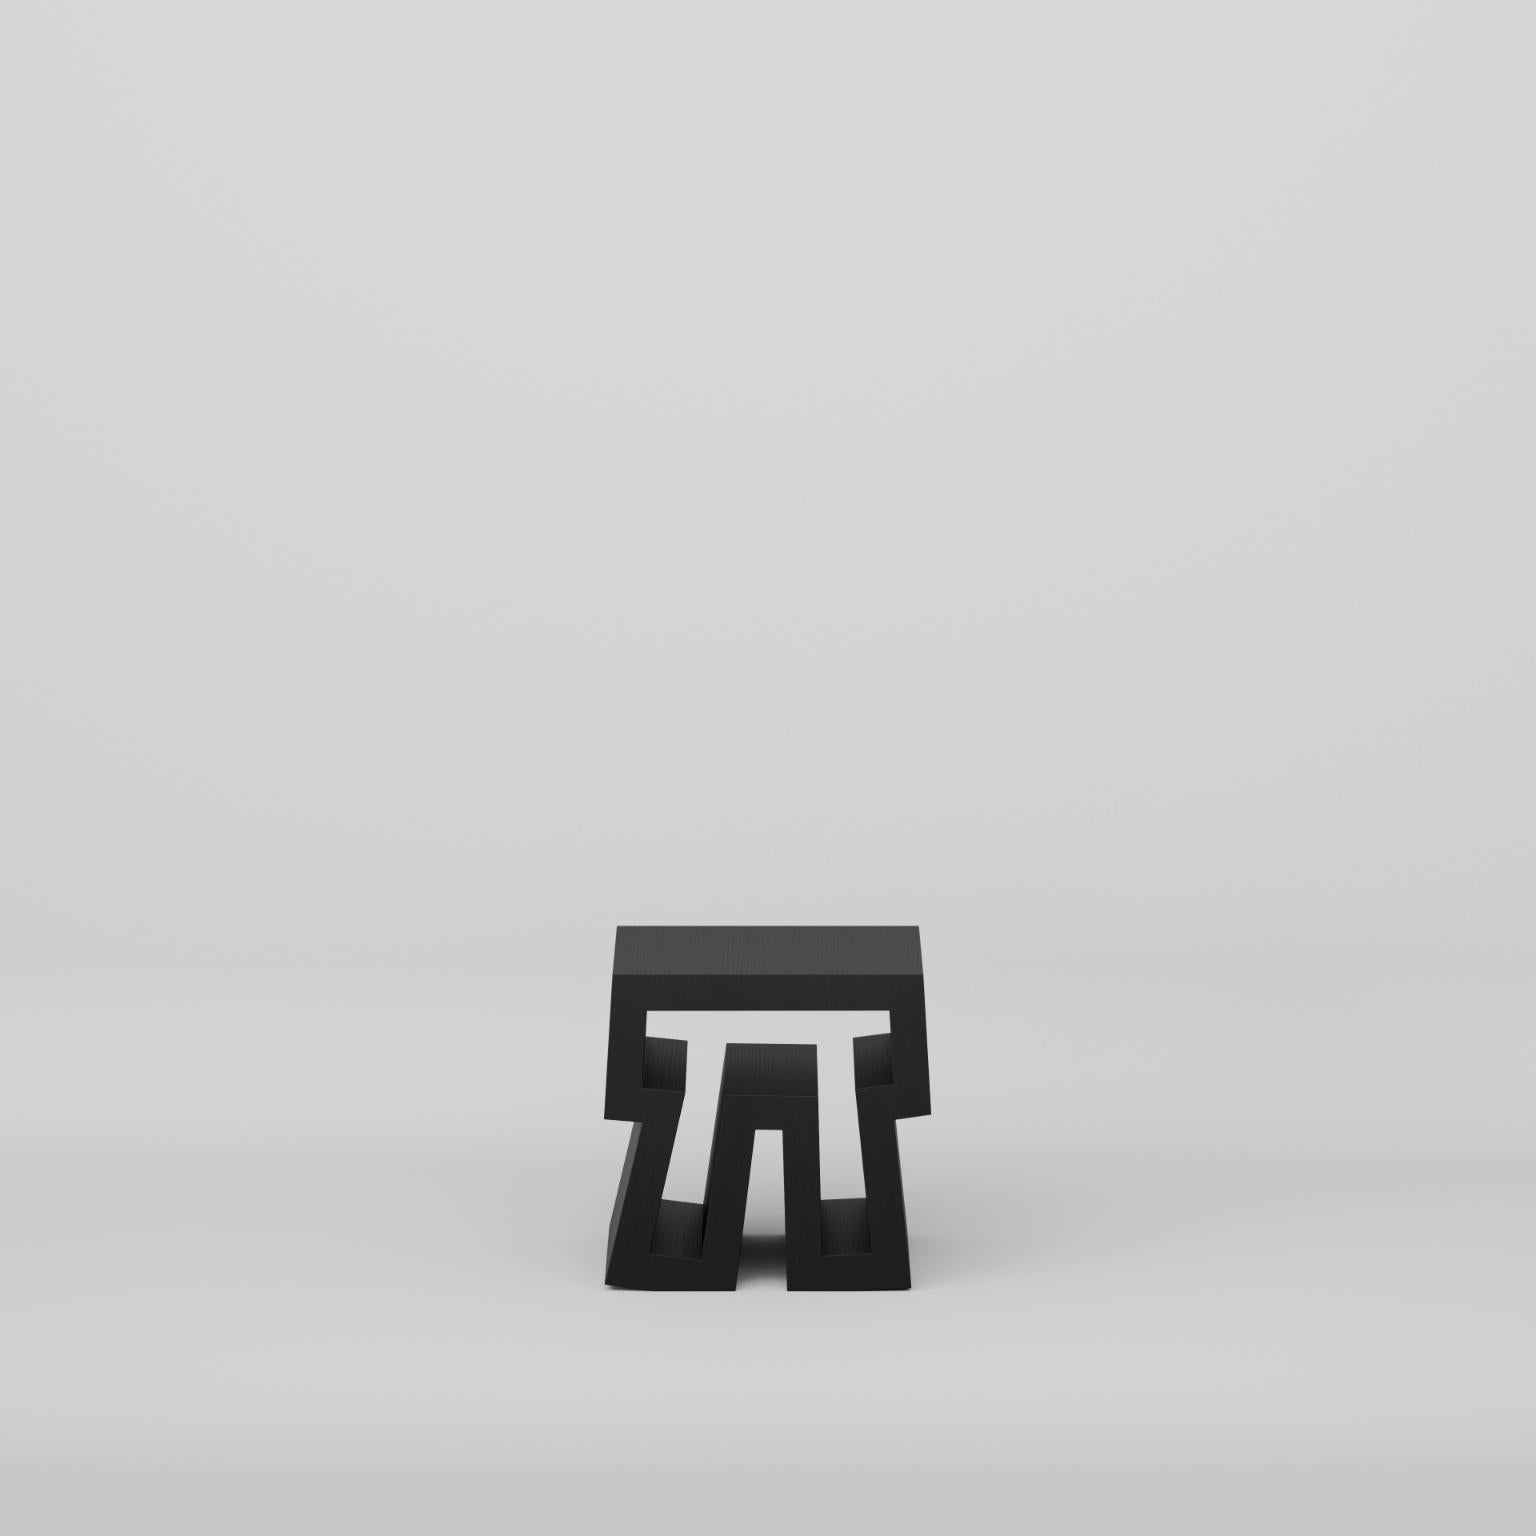 Graffiti Project Stool by Wonwoo Koo
Dimensions: D 35 x W 47 x H 55 cm.
Materials: Oak wood veneer.

Different color options are available: black, beige, white gray, blue or orange. Please contact us.

Wonwoo Koo
I majored in furniture design in